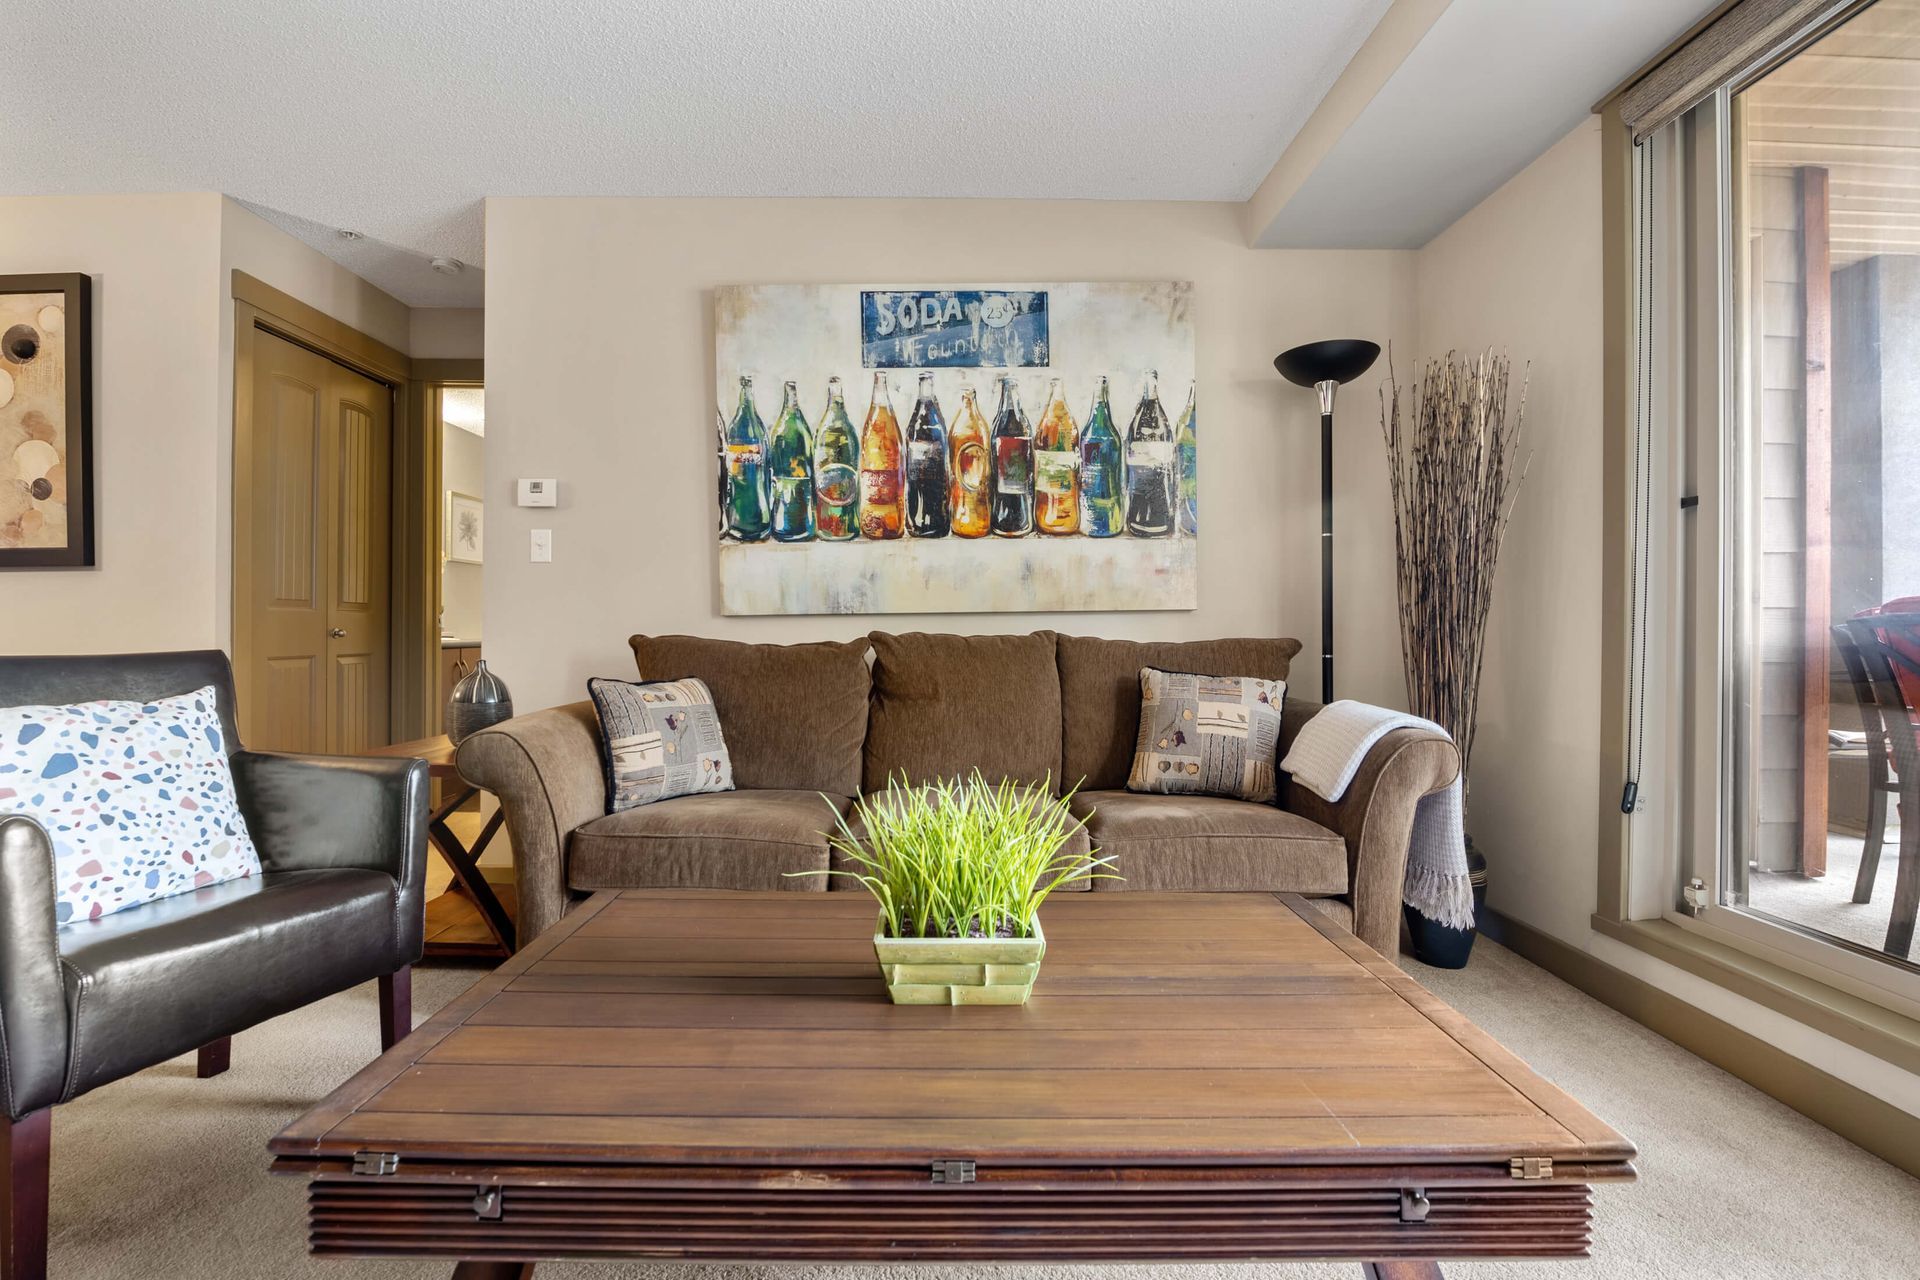 Living room at the Lake Windermere Pointe Condos in Invermere, BC managed by Aisling Baile Property Management